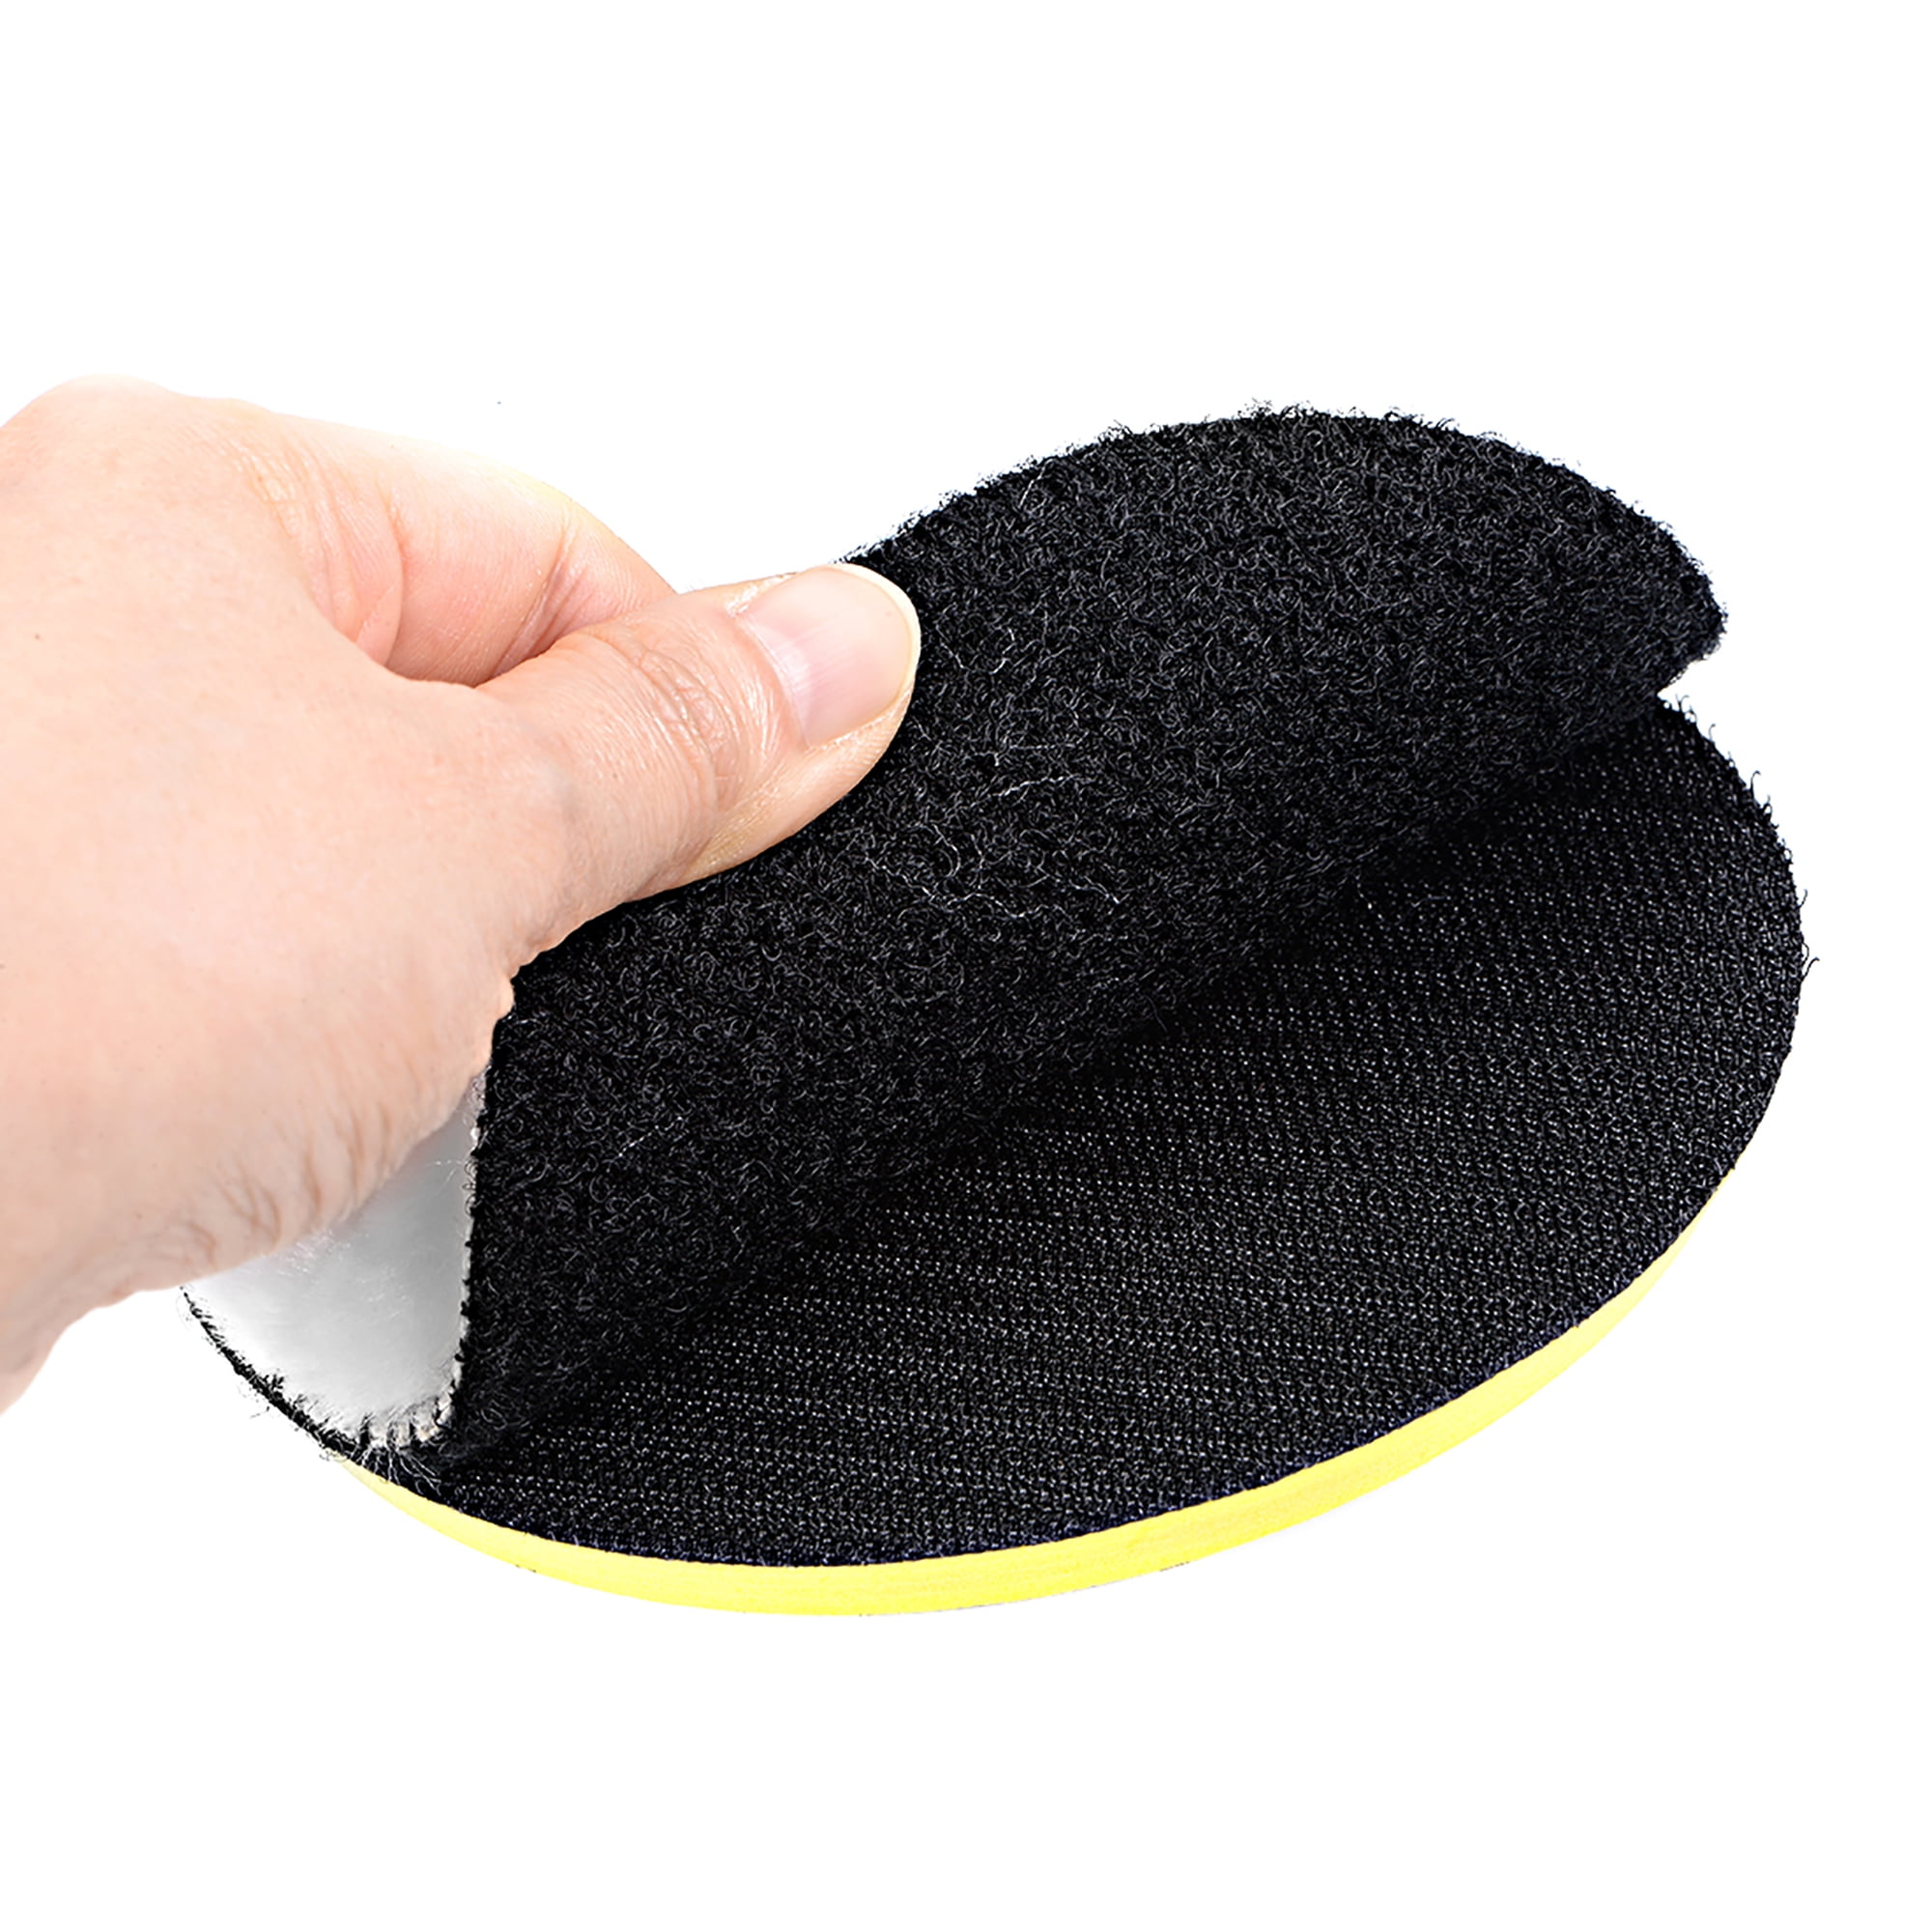 Furniture Glass and So On Inzoey Wool Polishing Pad 5 Inches Soft Sheepskin Buffing Pads with Hook and Loop Back Wool Cutting Pad for Car Pack of 2 